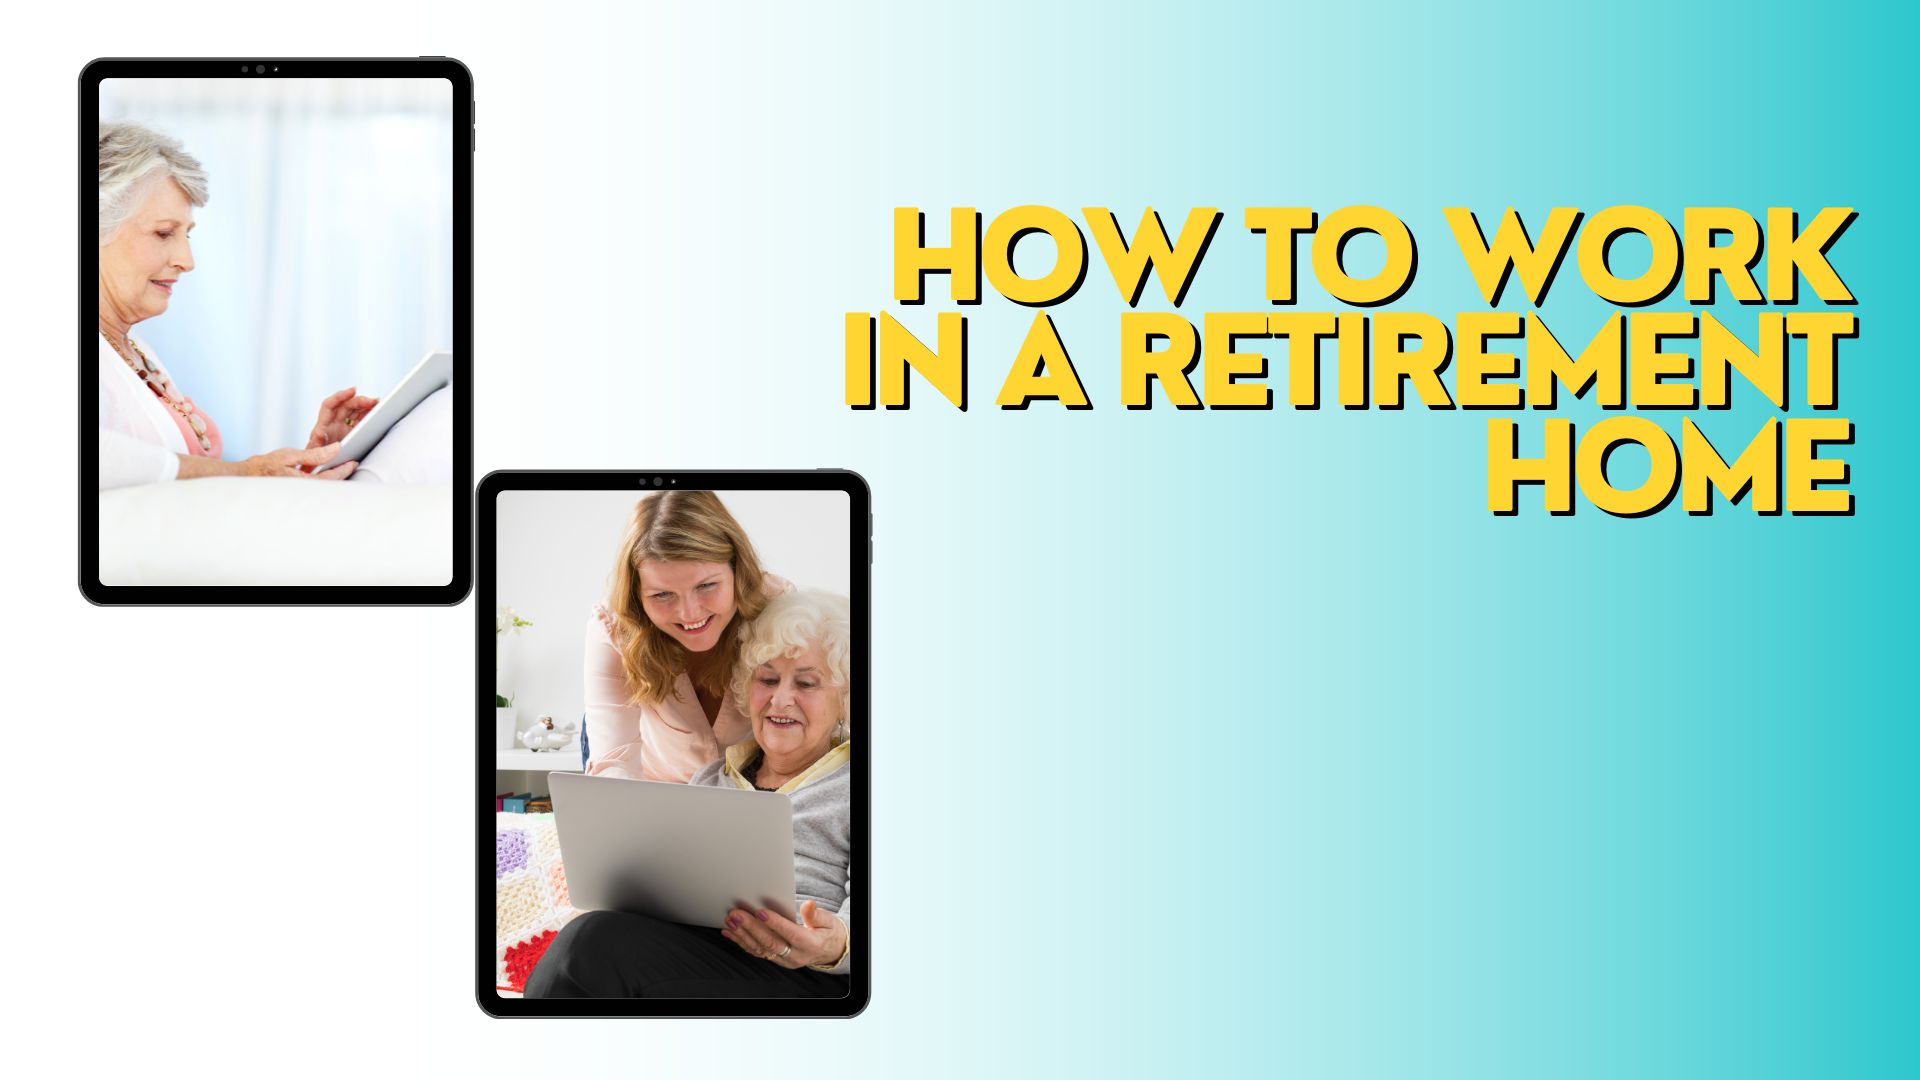 How to Work in a Retirement Home